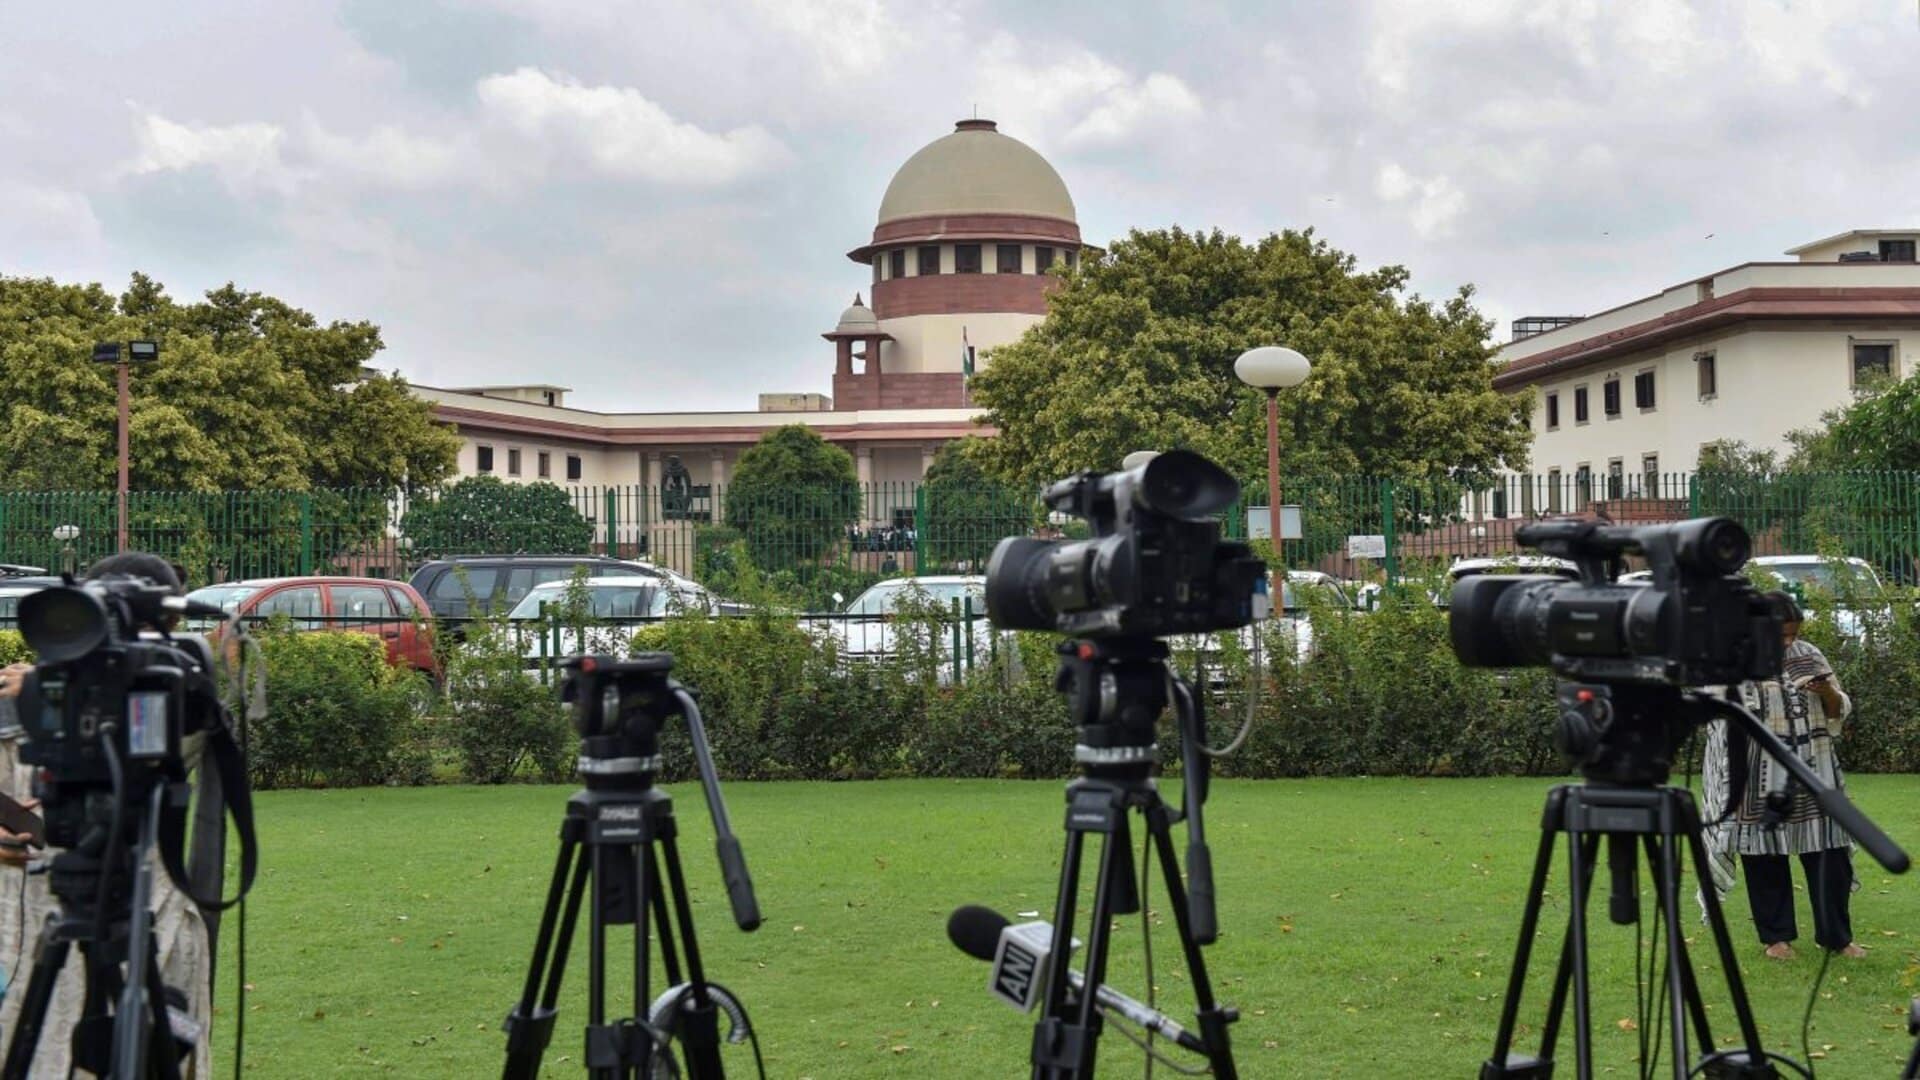 Live streaming, citizens are entitled to know what goes on in courts: Justice DY Chandrachud